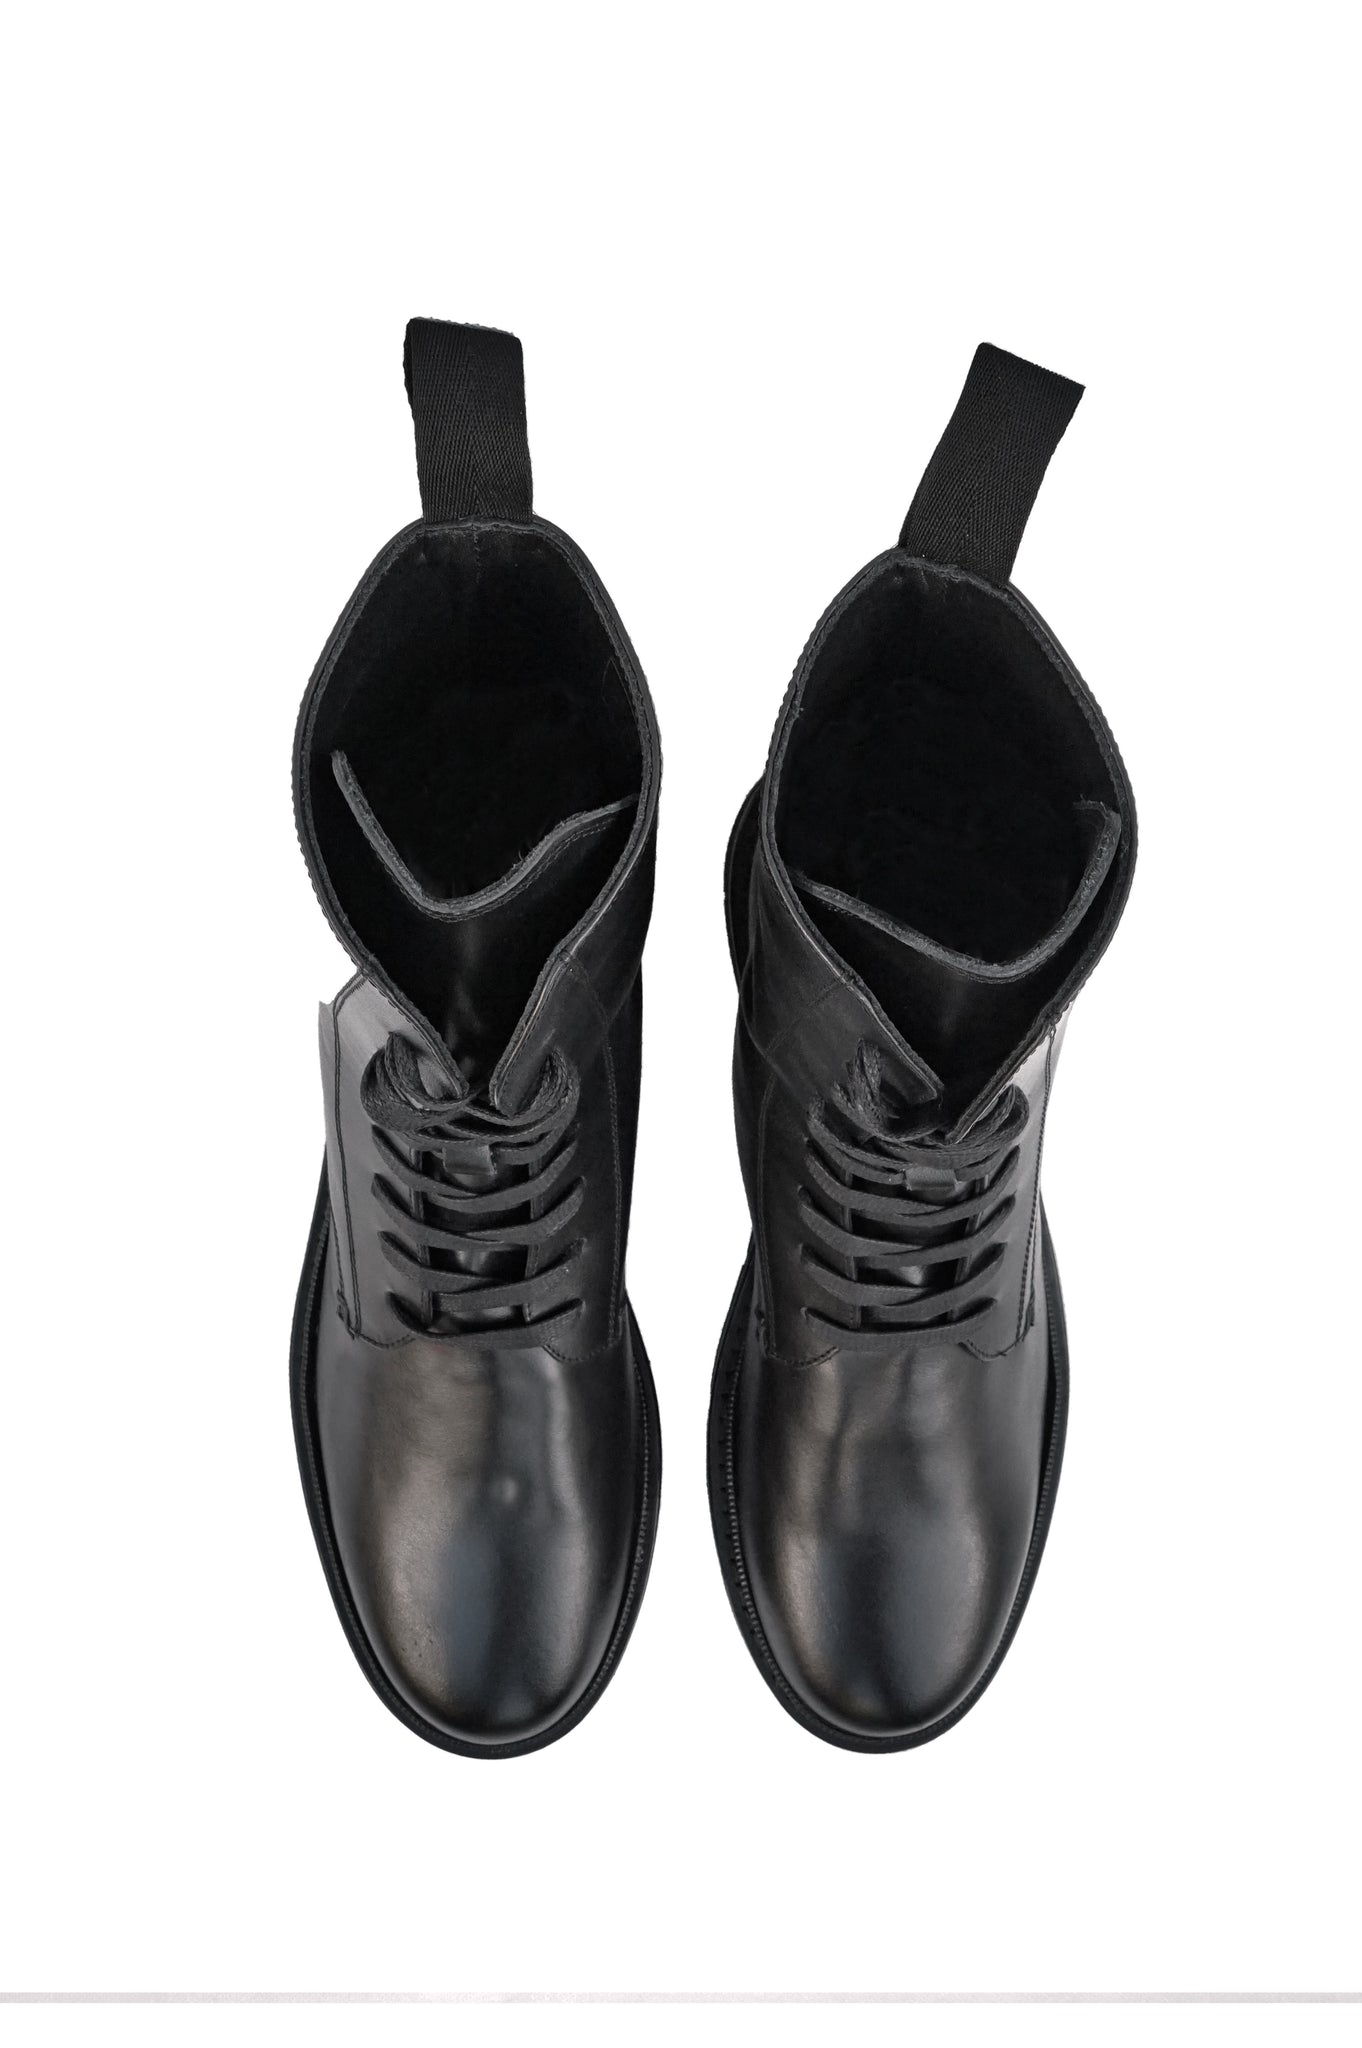 ST03 LACE-UP LEATHER BOOTS